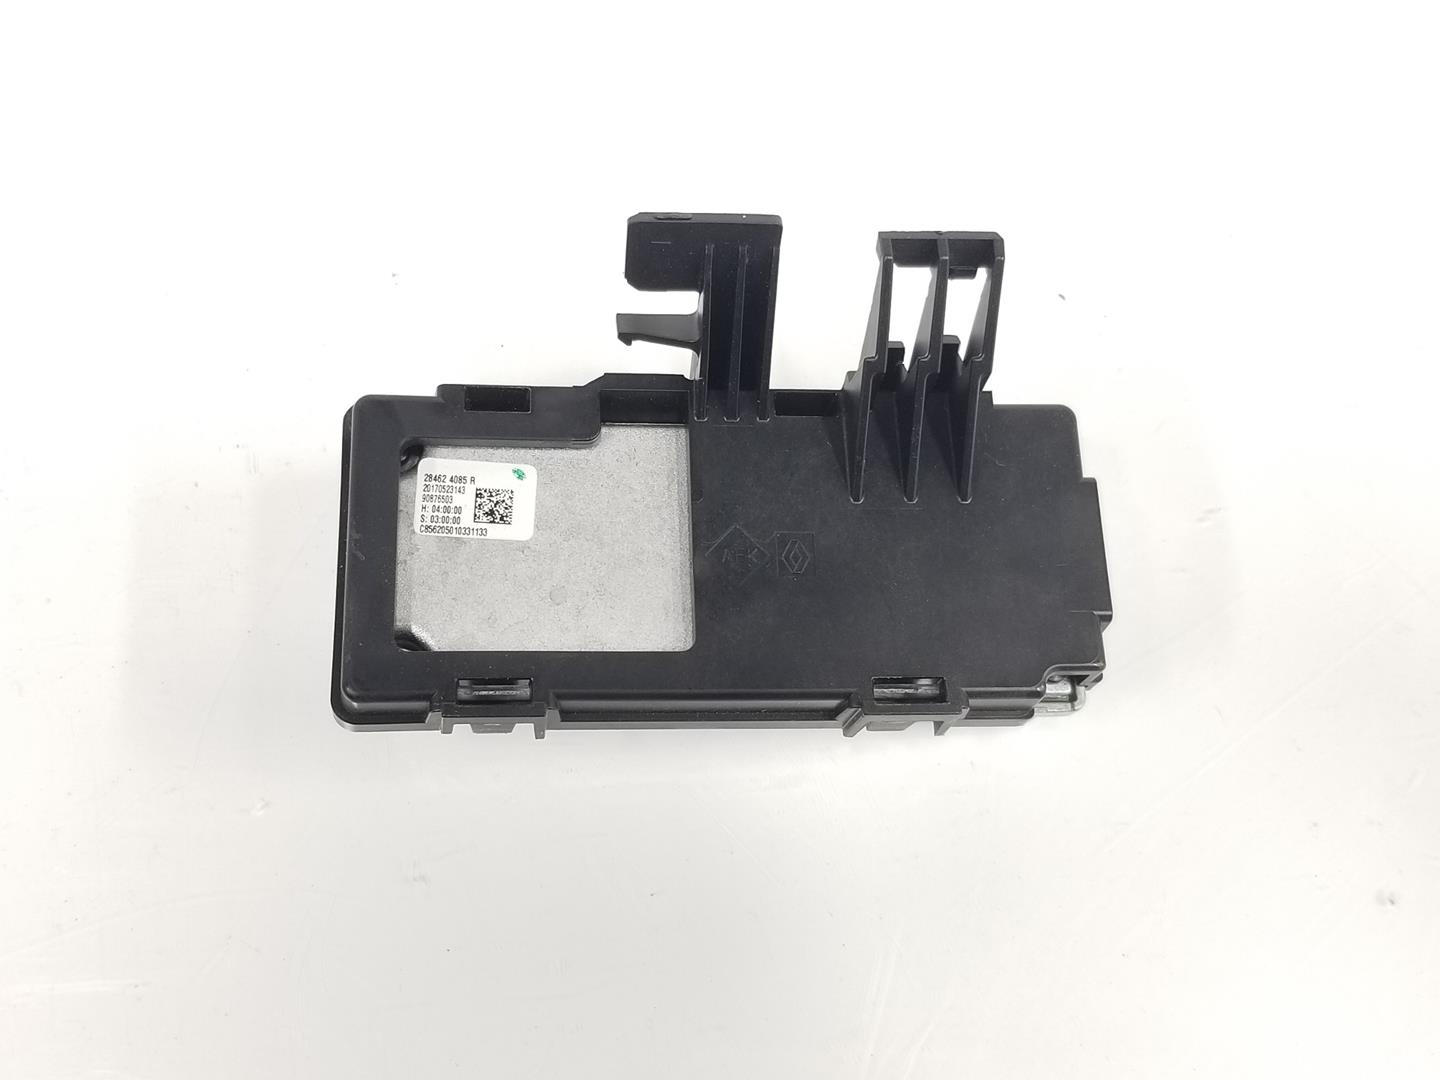 RENAULT Front Camera 284624085R, 284624085R 19892660